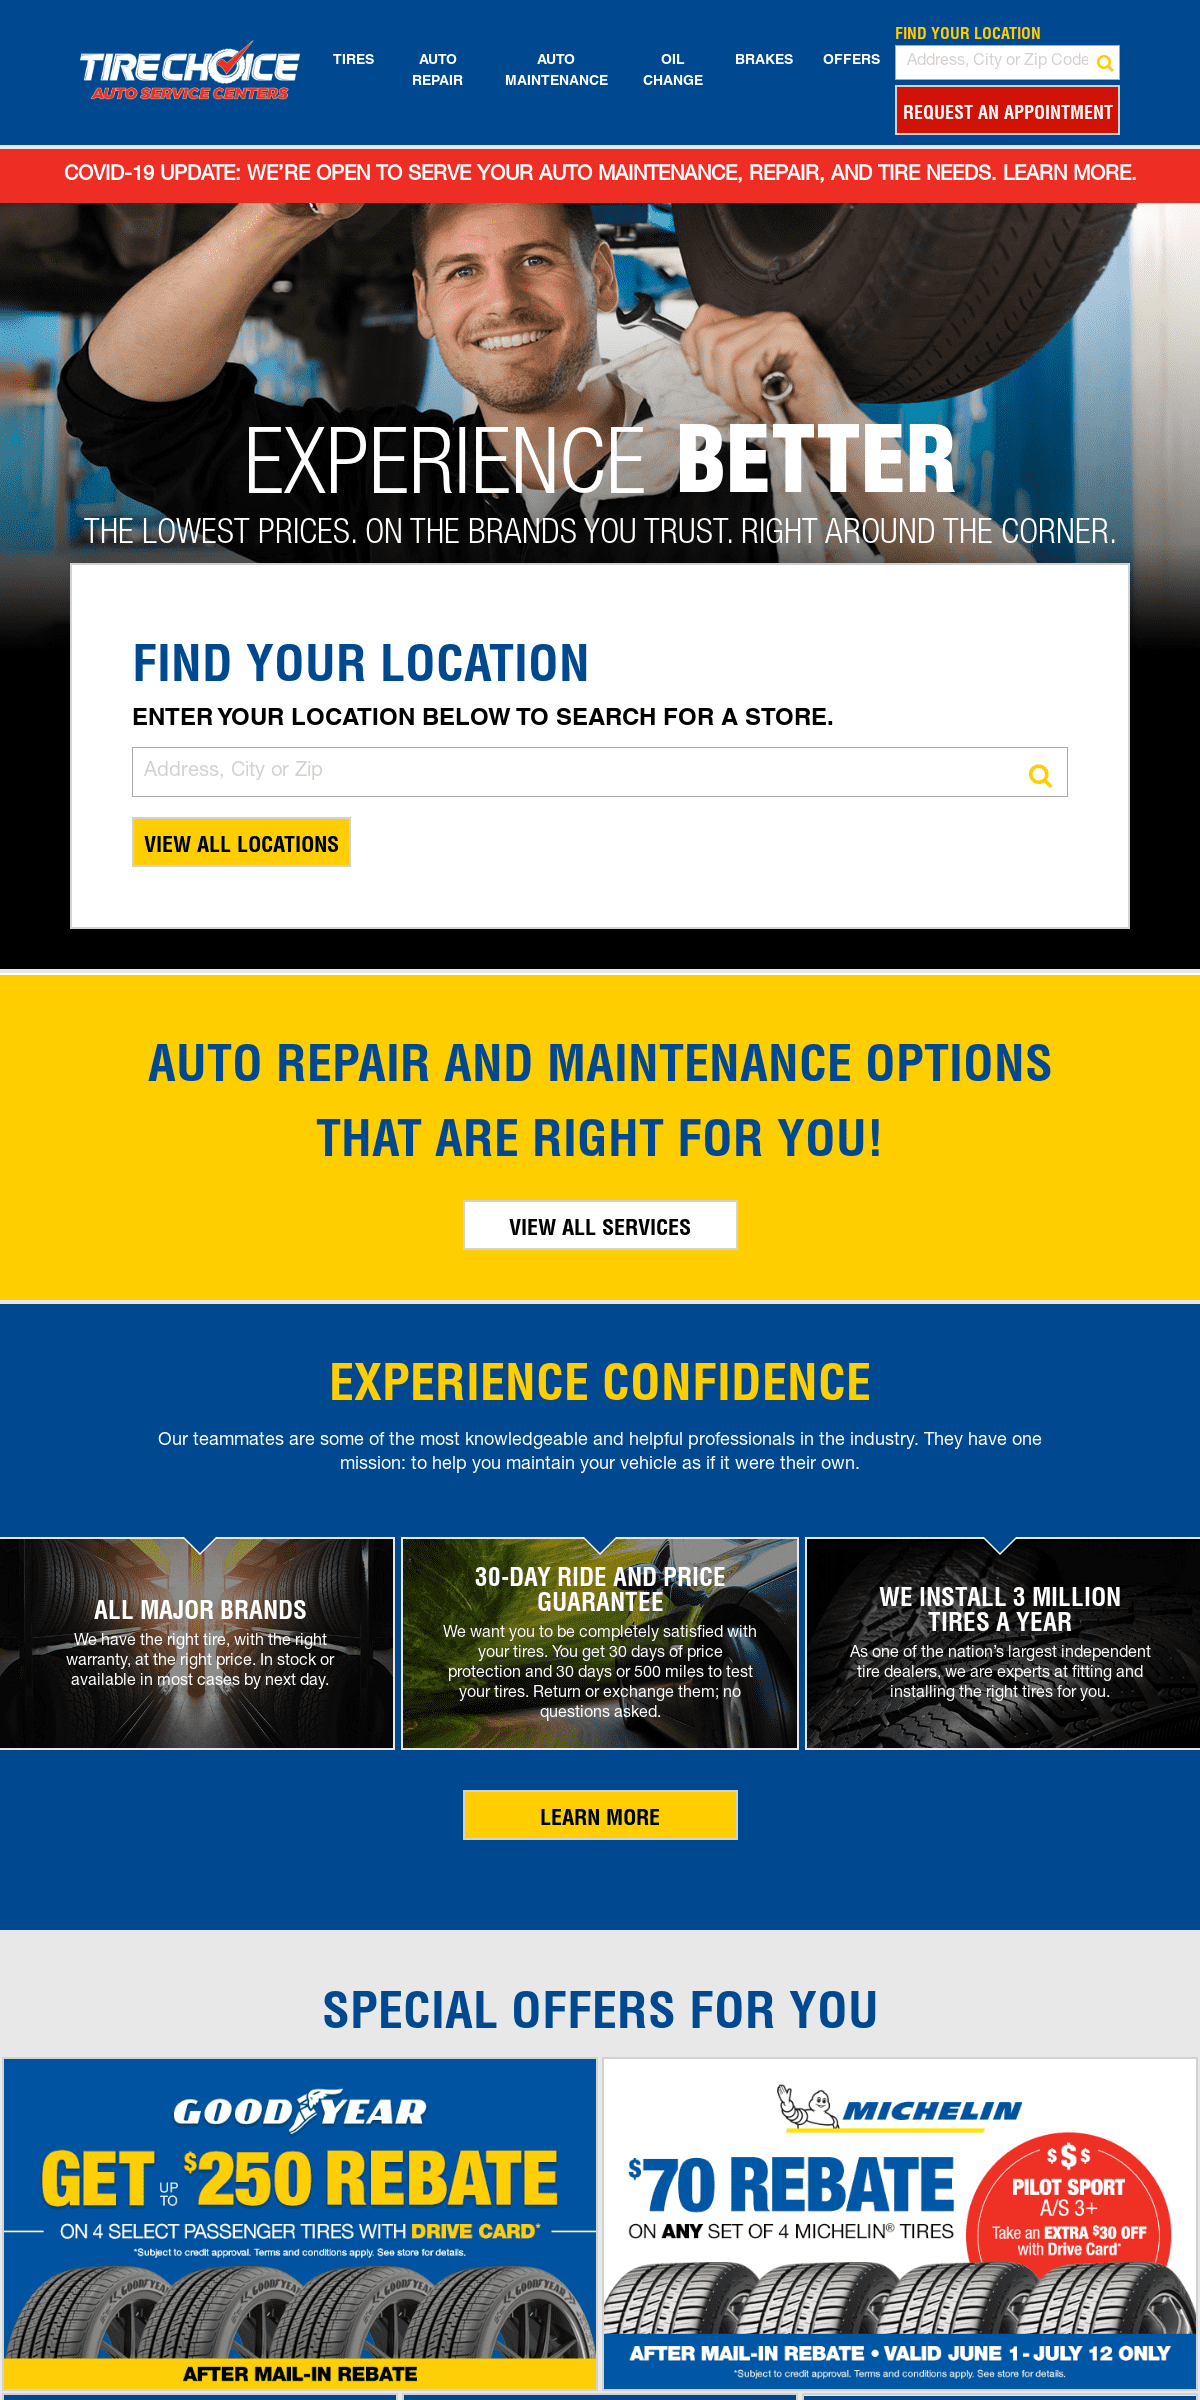 A complete backup of thetirechoice.com